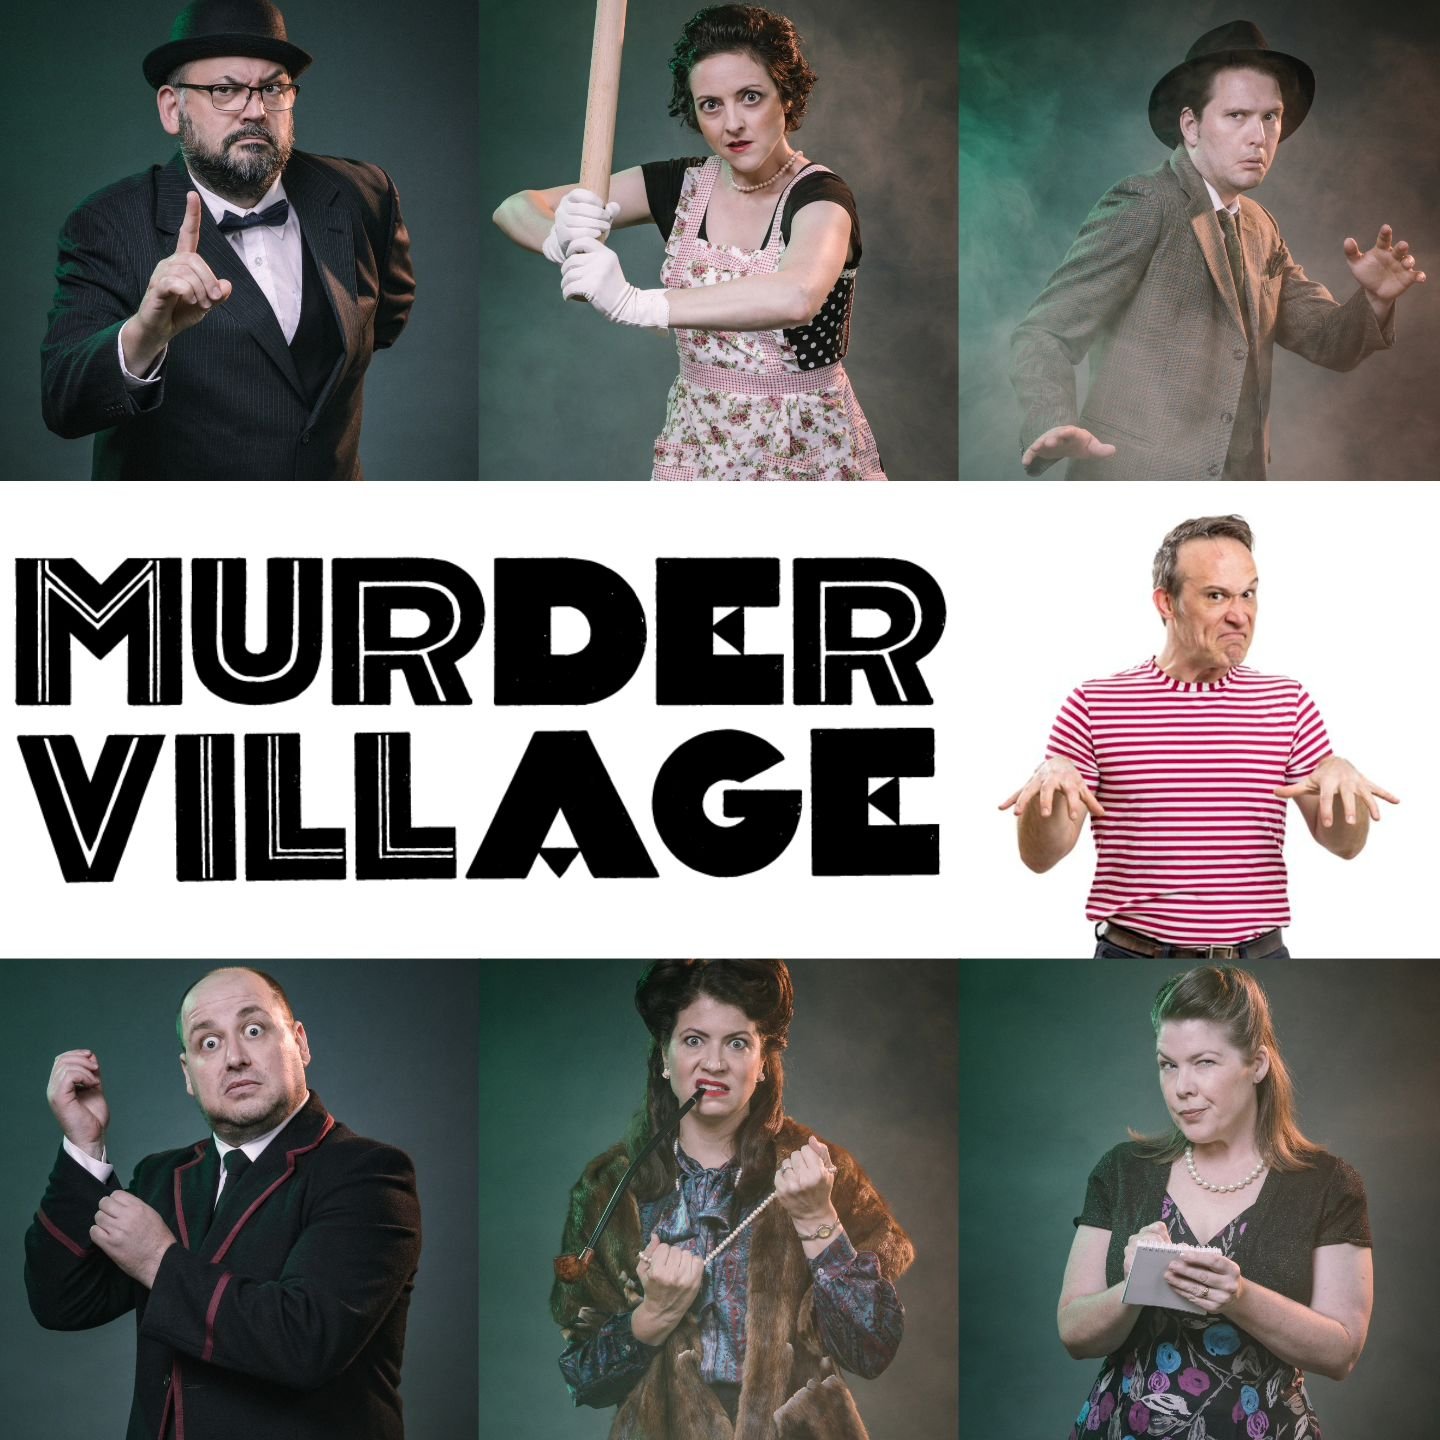 Comedy Festival season may be over, but Murder Village season isn't! Next Saturday night, our monthly shows are back - and here is the talented cast for the improvised mayhem. Don't miss special guest Matt Hadgraft on keys! Tickets are on sale now vi